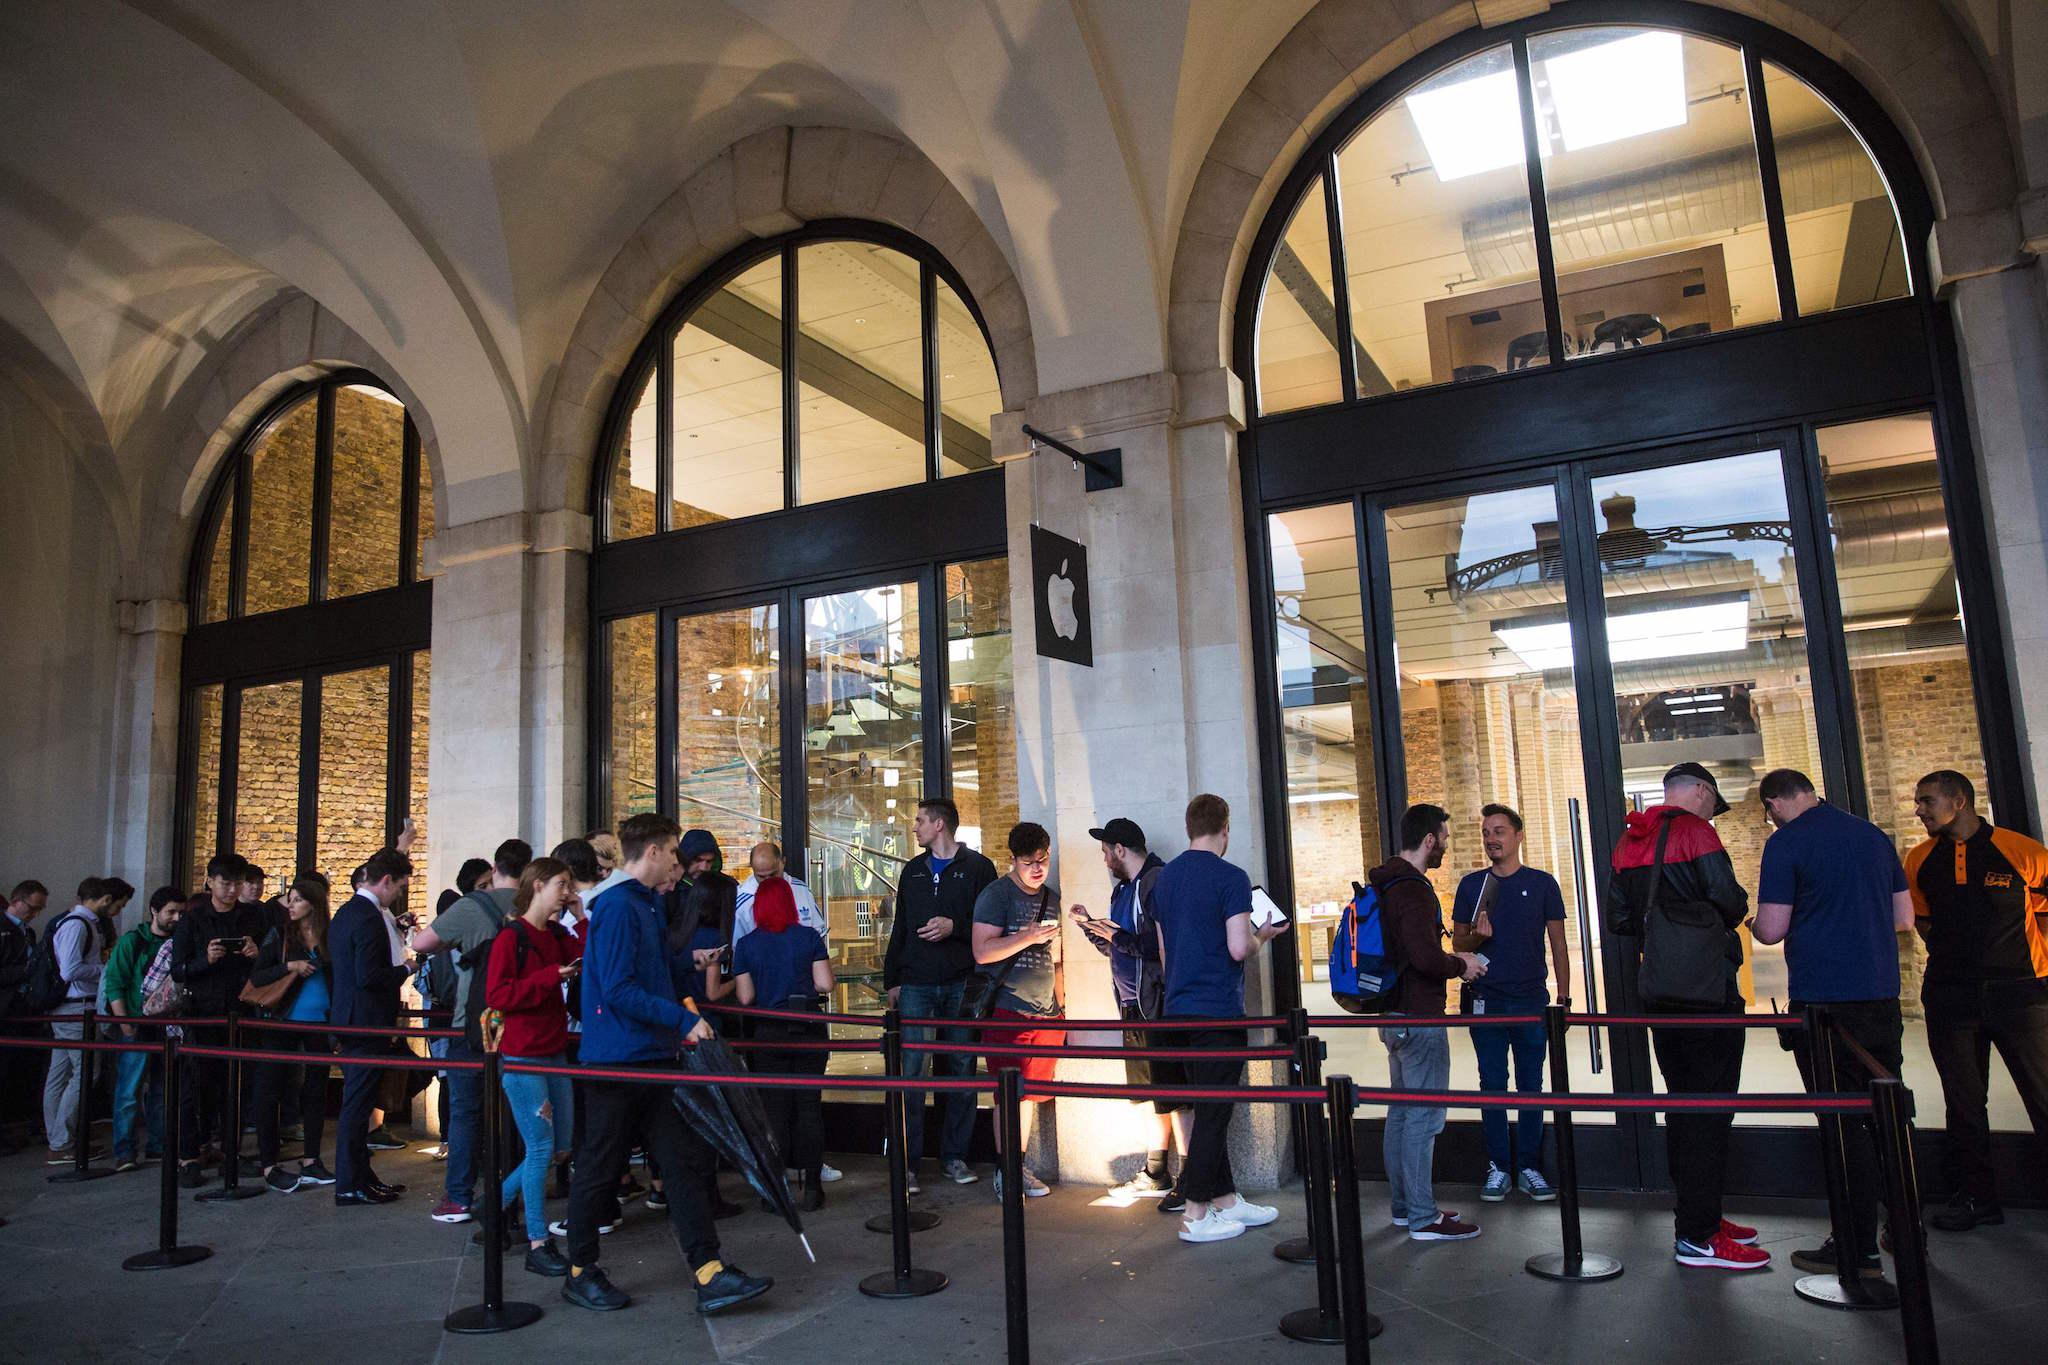 People queue outside the Apple Store to buy the new iPhone 7 smartphone on the day of its release at Covent Garden in London on September 16, 2016. Apple's iPhone 7 launch generated trademark queues and brisk sales today that defied gloomy expectations